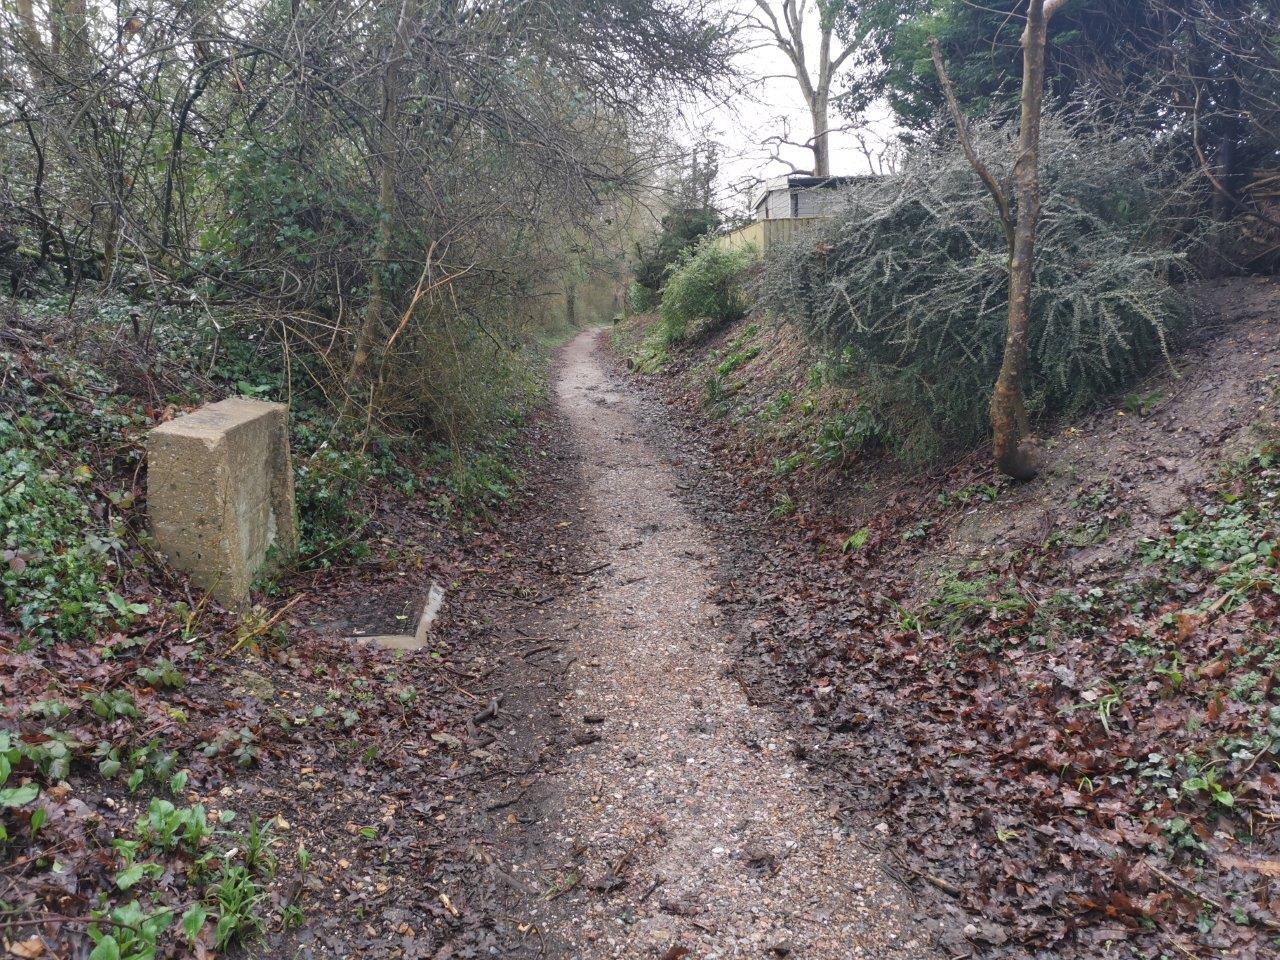 narrow roughly surfaced cycle track bordered by hedges and trees